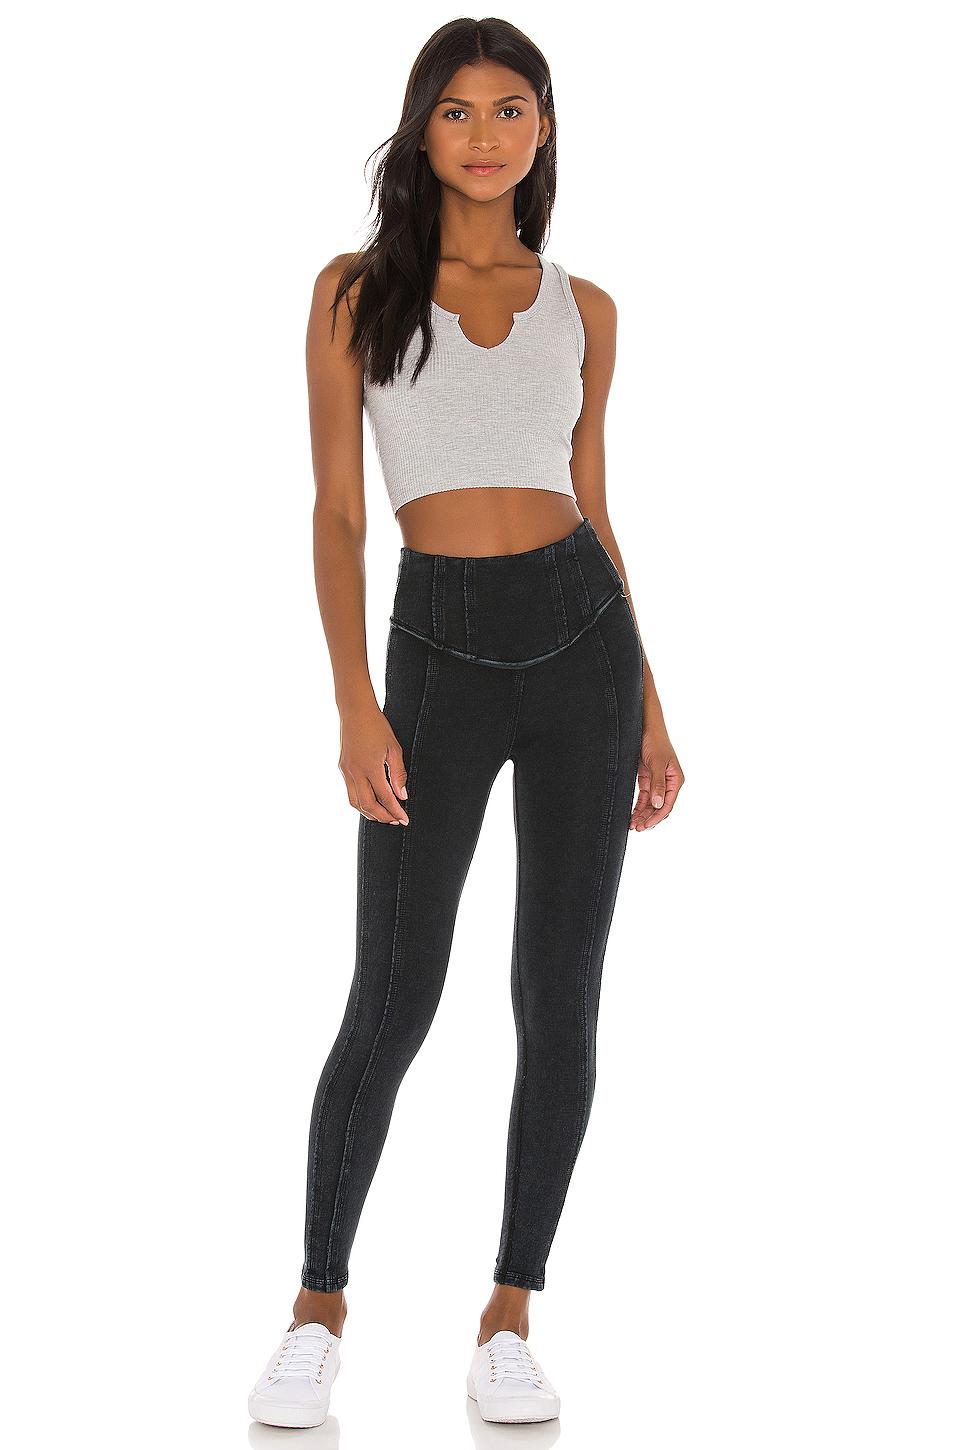 Prepster Leggings by FP Movement at Free People, Black, XS, £108.00